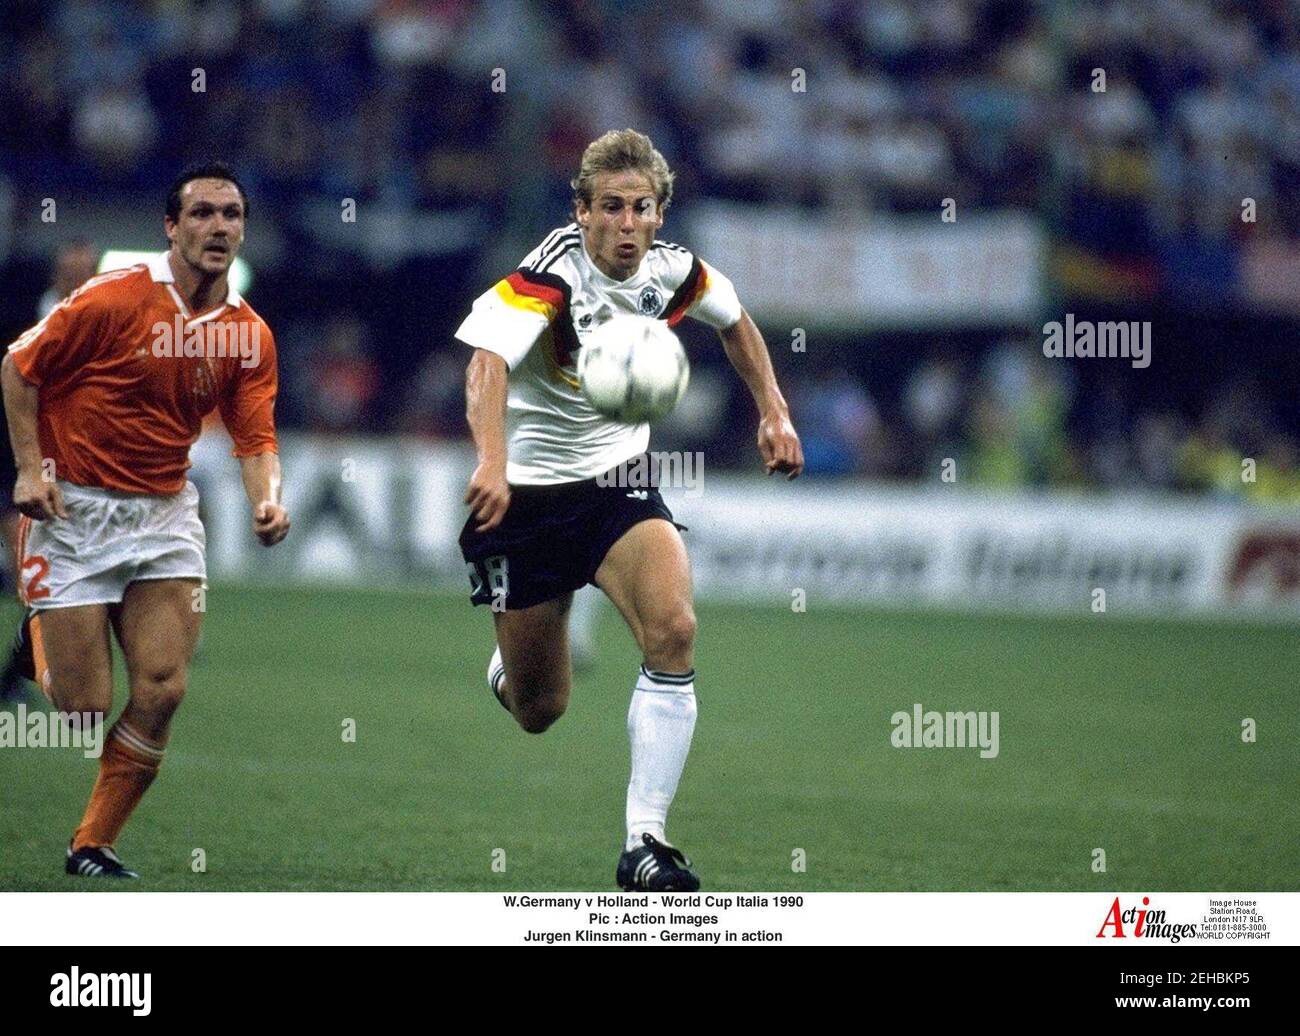 Football 1990 Fifa World Cup Second Round West Germany V Holland San Siro Milan 24 6 90 Jurgen Klinsmann Of West Germany R In Action Mandatory Credit Action Images Stock Photo Alamy